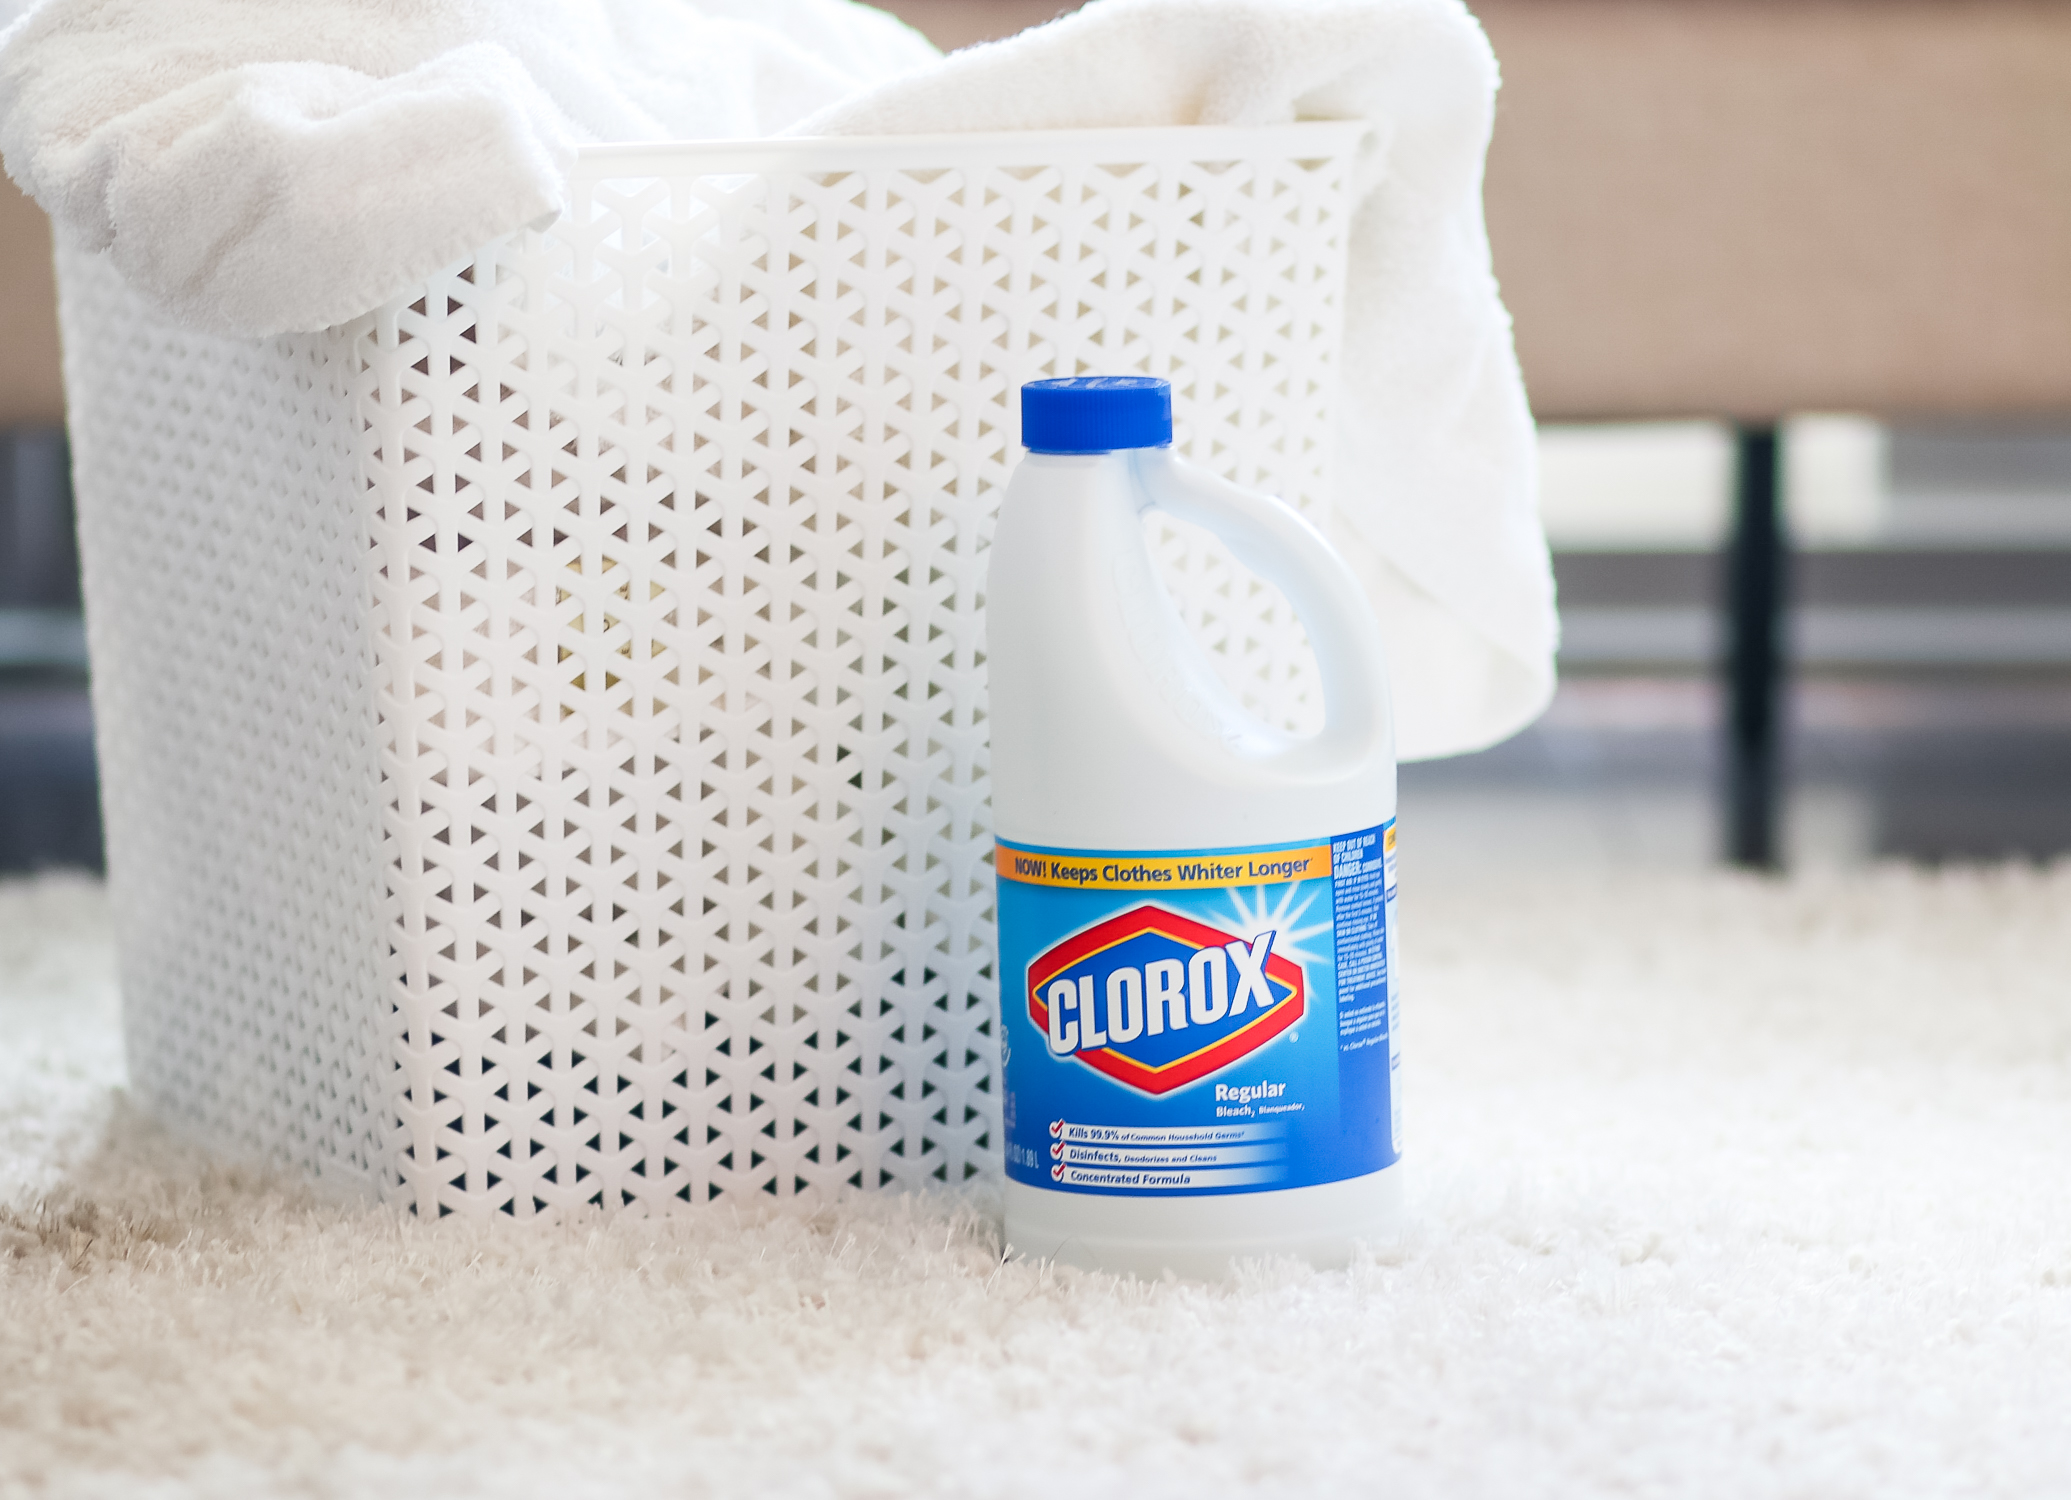 How to keep clothes white longer with CLOROX | Casual summer outfit (Shein one-shoulder stripped ruffle top and white jeans) by fashion blogger Stephanie Ziajka from Diary of a Debutante